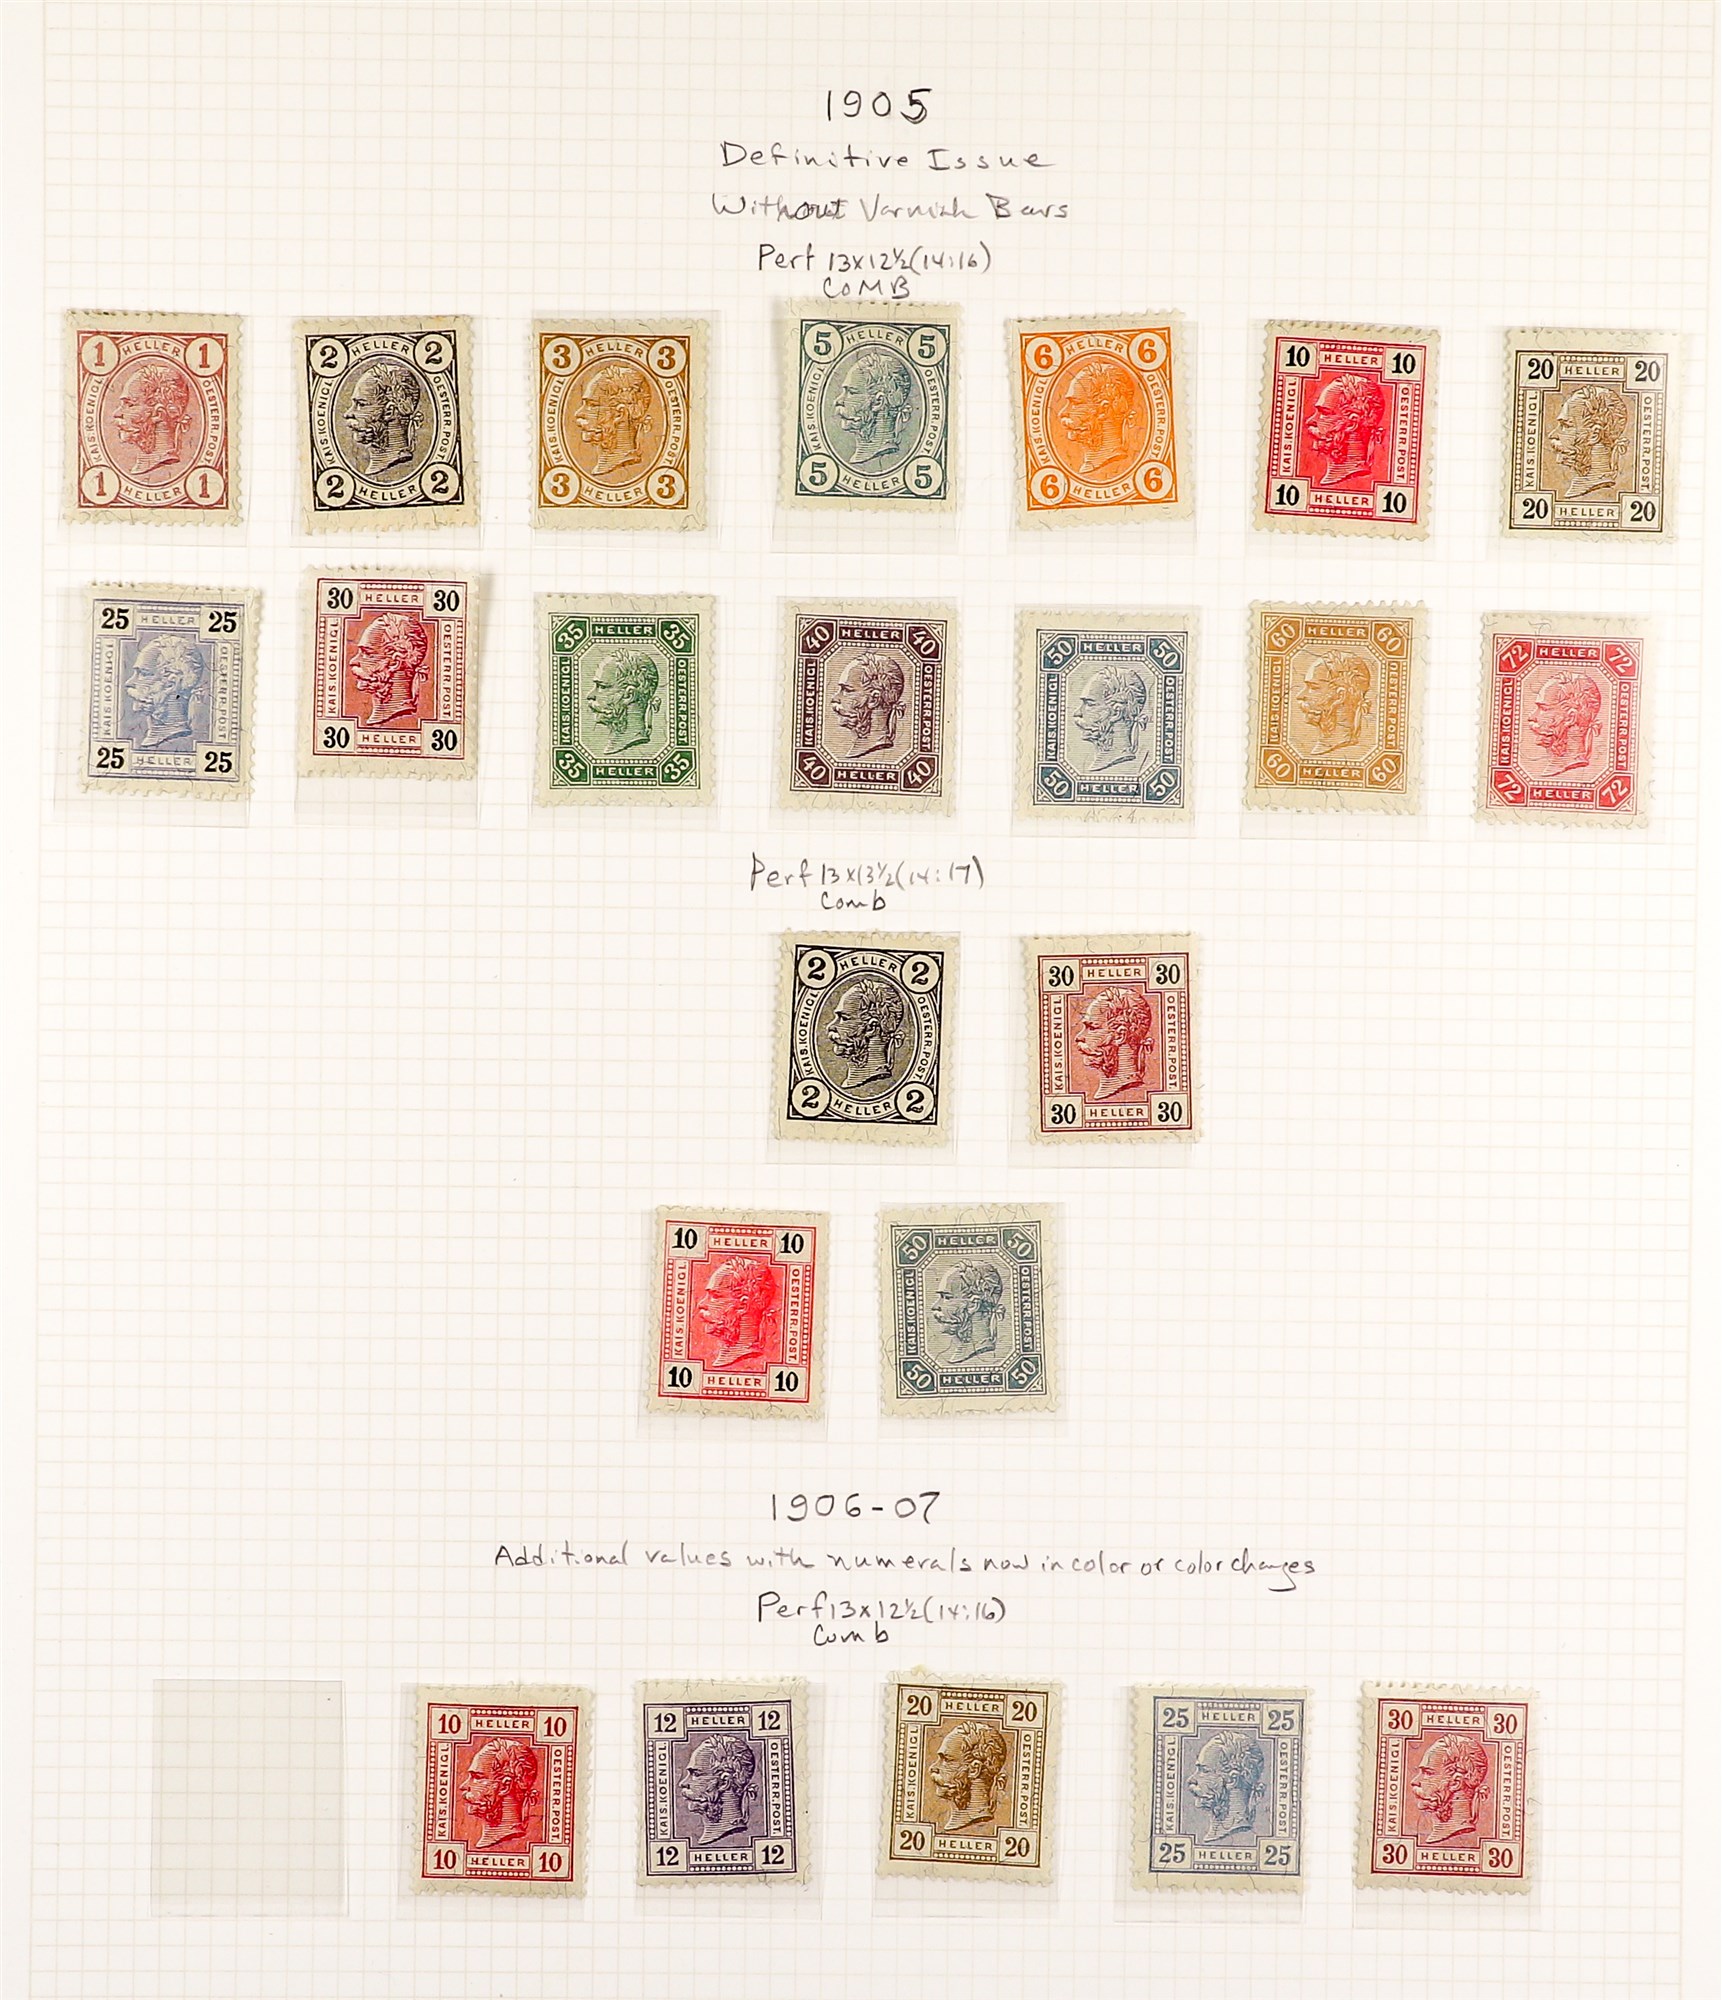 AUSTRIA 1890 - 1907 FRANZ JOSEF DEFINITIVES collection of over 180 mint / some never hinged mint - Image 11 of 11